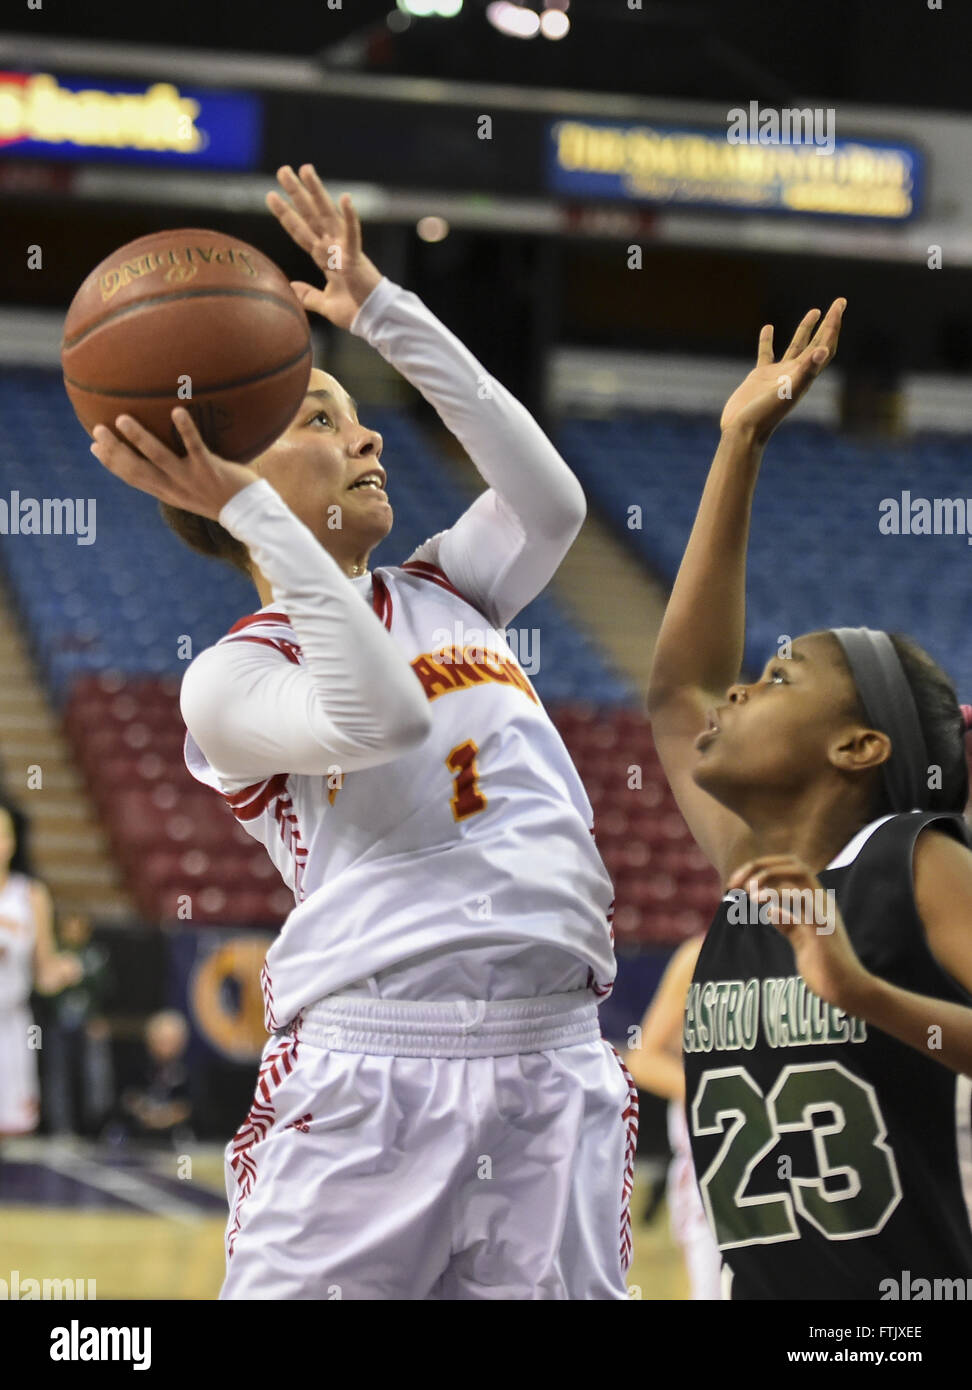 Sacramento, CA, USA. 19th Mar, 2016. St. Francis High School Troubadours Tia Hay (1), shoots the ball during the fourth quarter as the St. Francis High School Troubadours plays the Castro Valley Trojans for the CIF Northern California Regional Girls Division I championship at Sleep Train Arena, Saturday Mar 19, 2016.photo by Brian Baer © Brian Baer/Sacramento Bee/ZUMA Wire/Alamy Live News Stock Photo